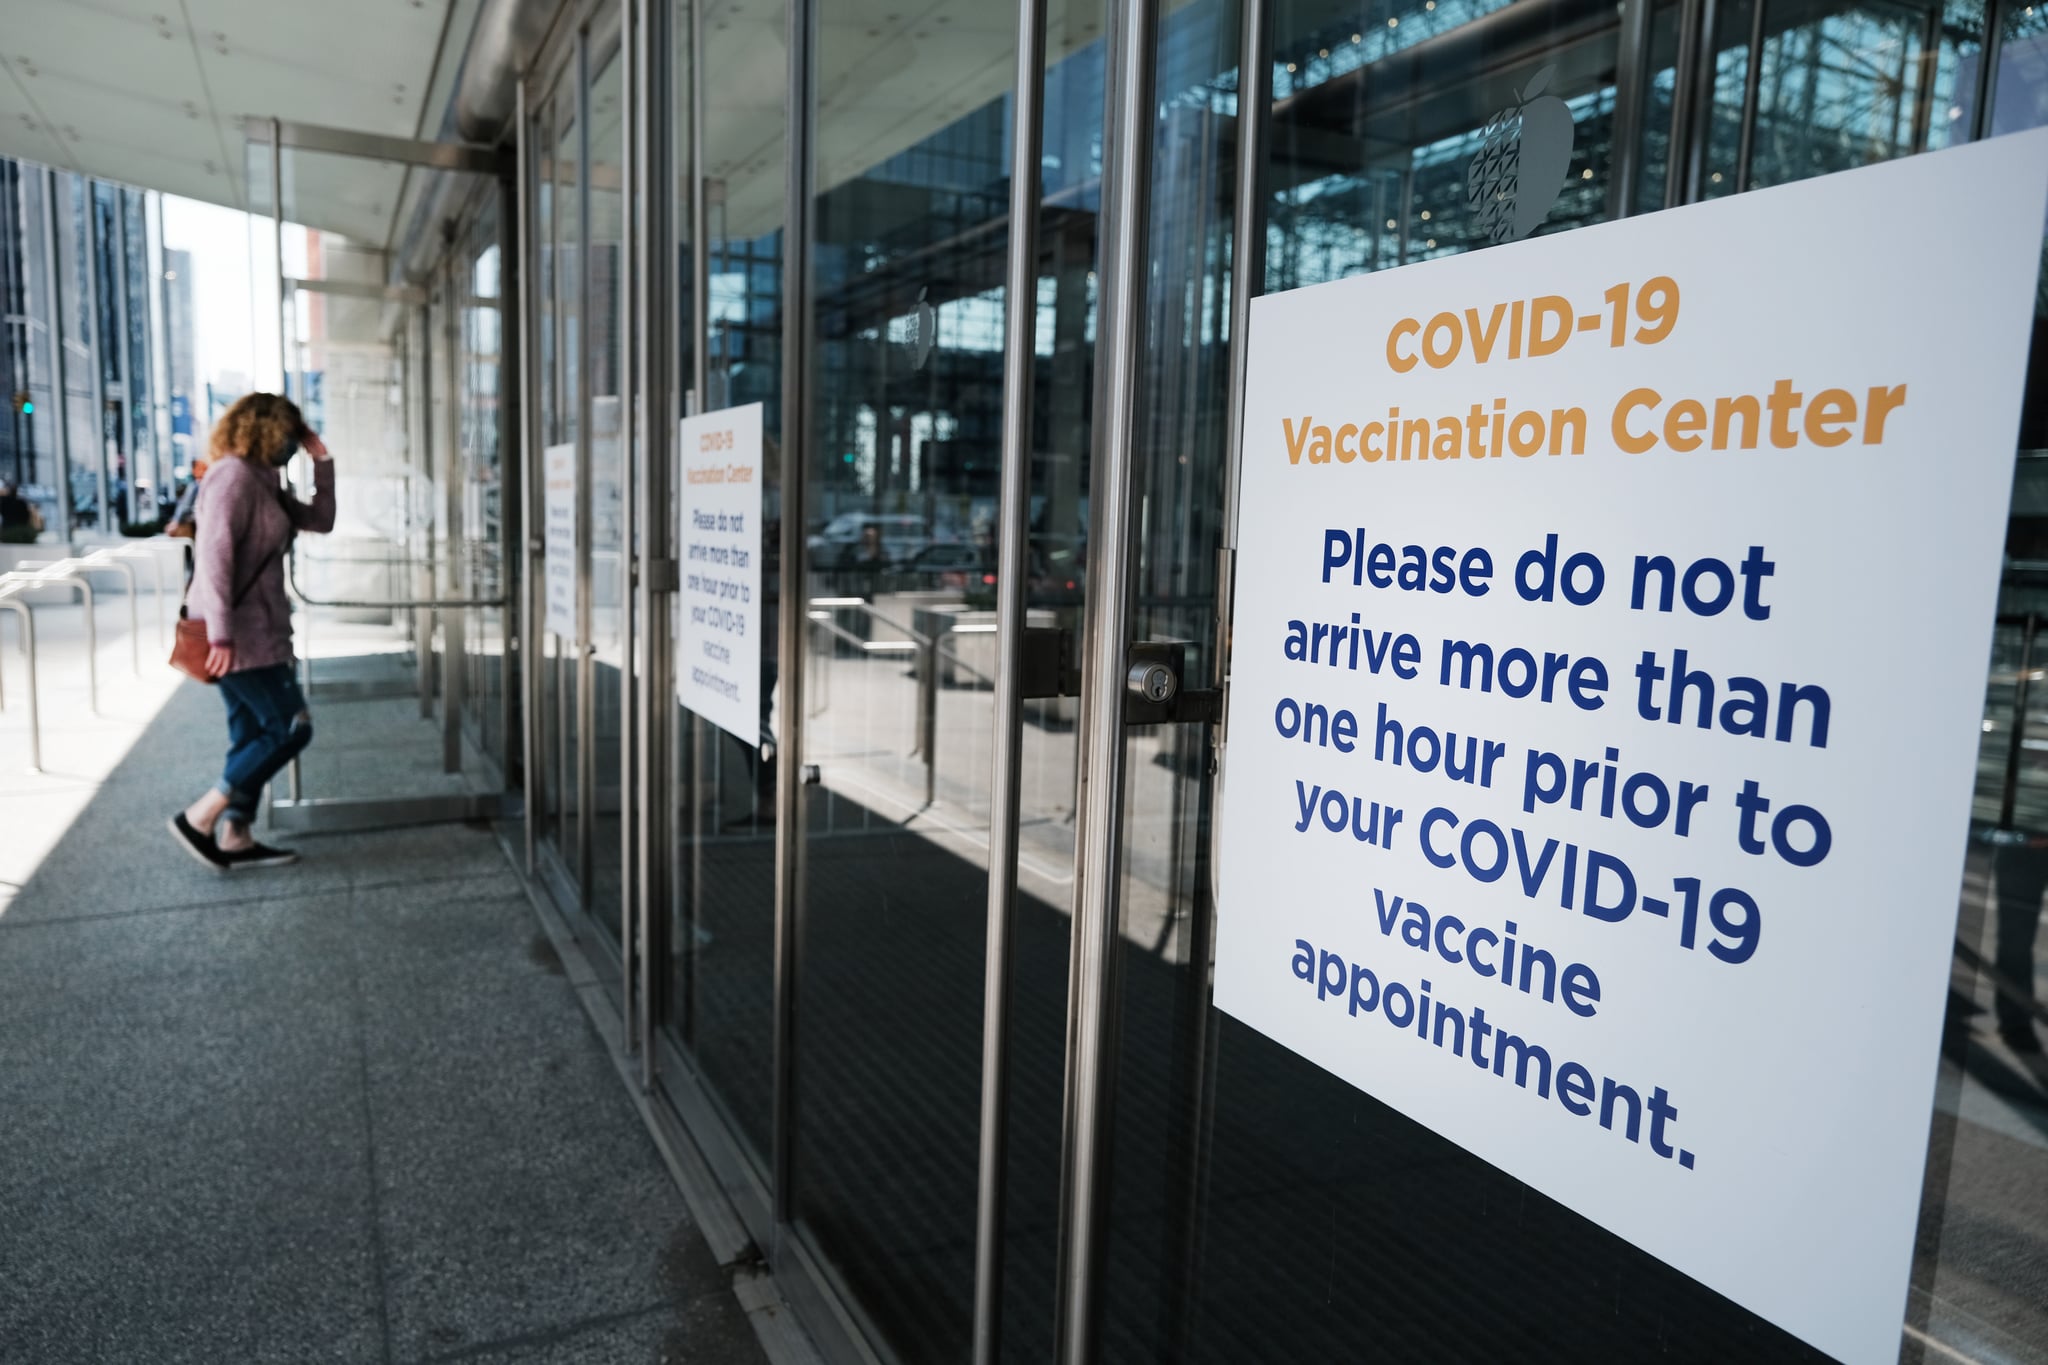 NEW YORK, NEW YORK - MARCH 23: People enter and exit the Javits Center Covid-19 vaccination site on March 23, 2021 in New York City. As New York City slowly re-opens, Governor Andrew Cuomo announced that starting Tuesday residents ages 50 and up will be eligible to get the COVID vaccine. (Photo by Spencer Platt/Getty Images)